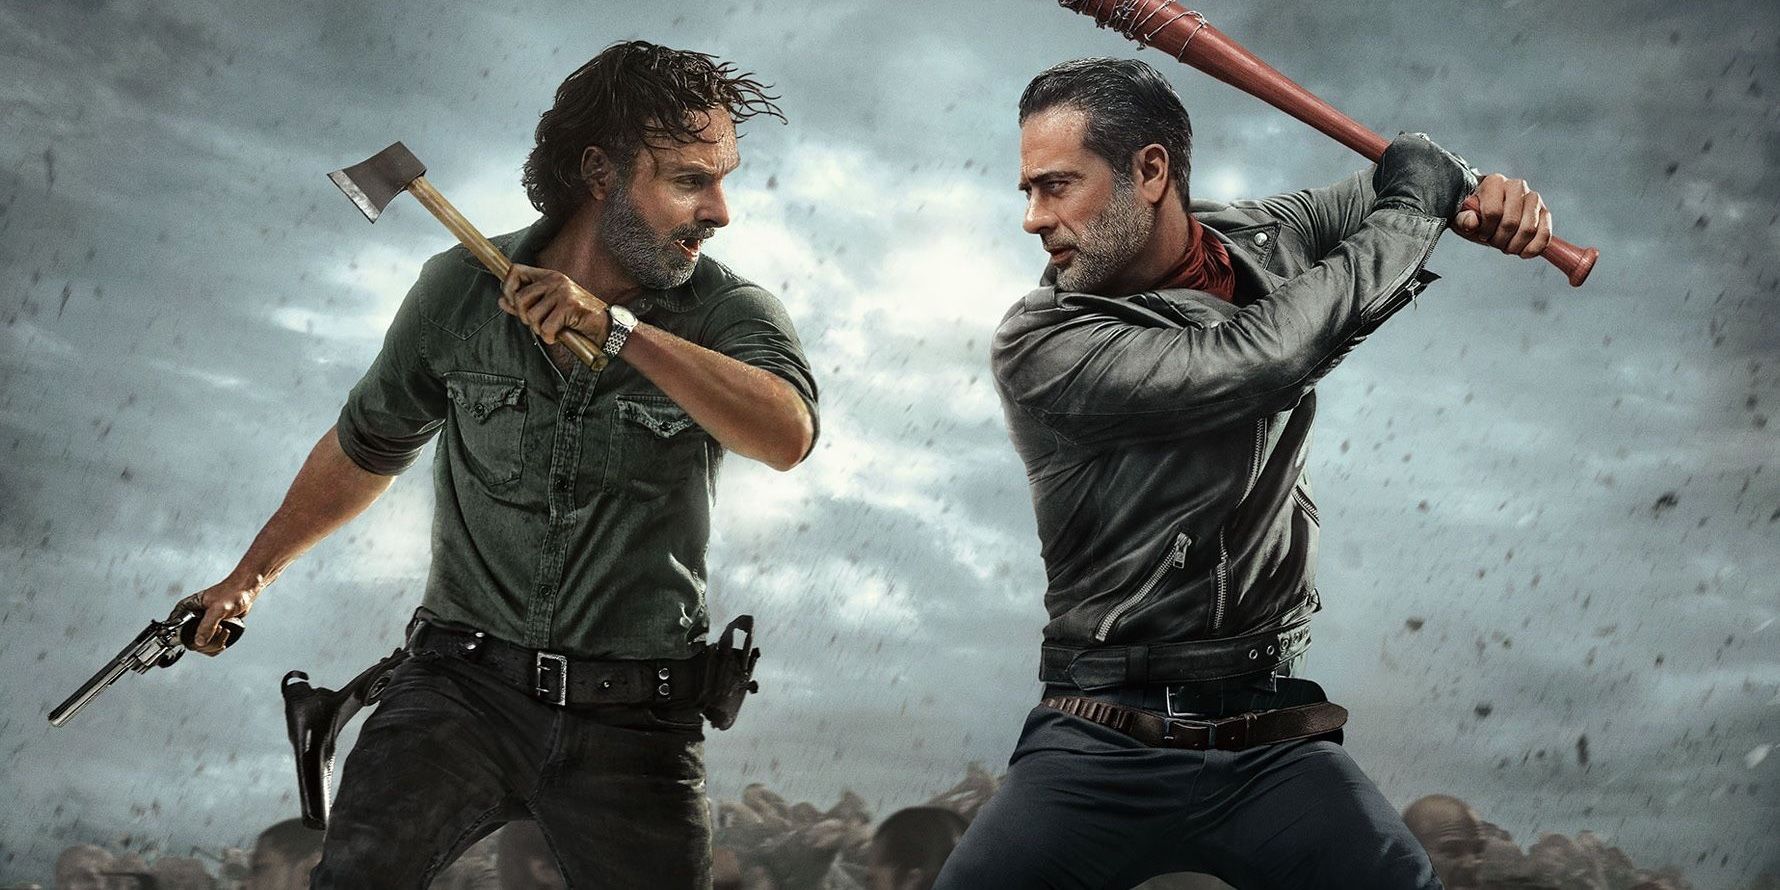 Walking Dead's Rick and Negan swing at each other in a fight